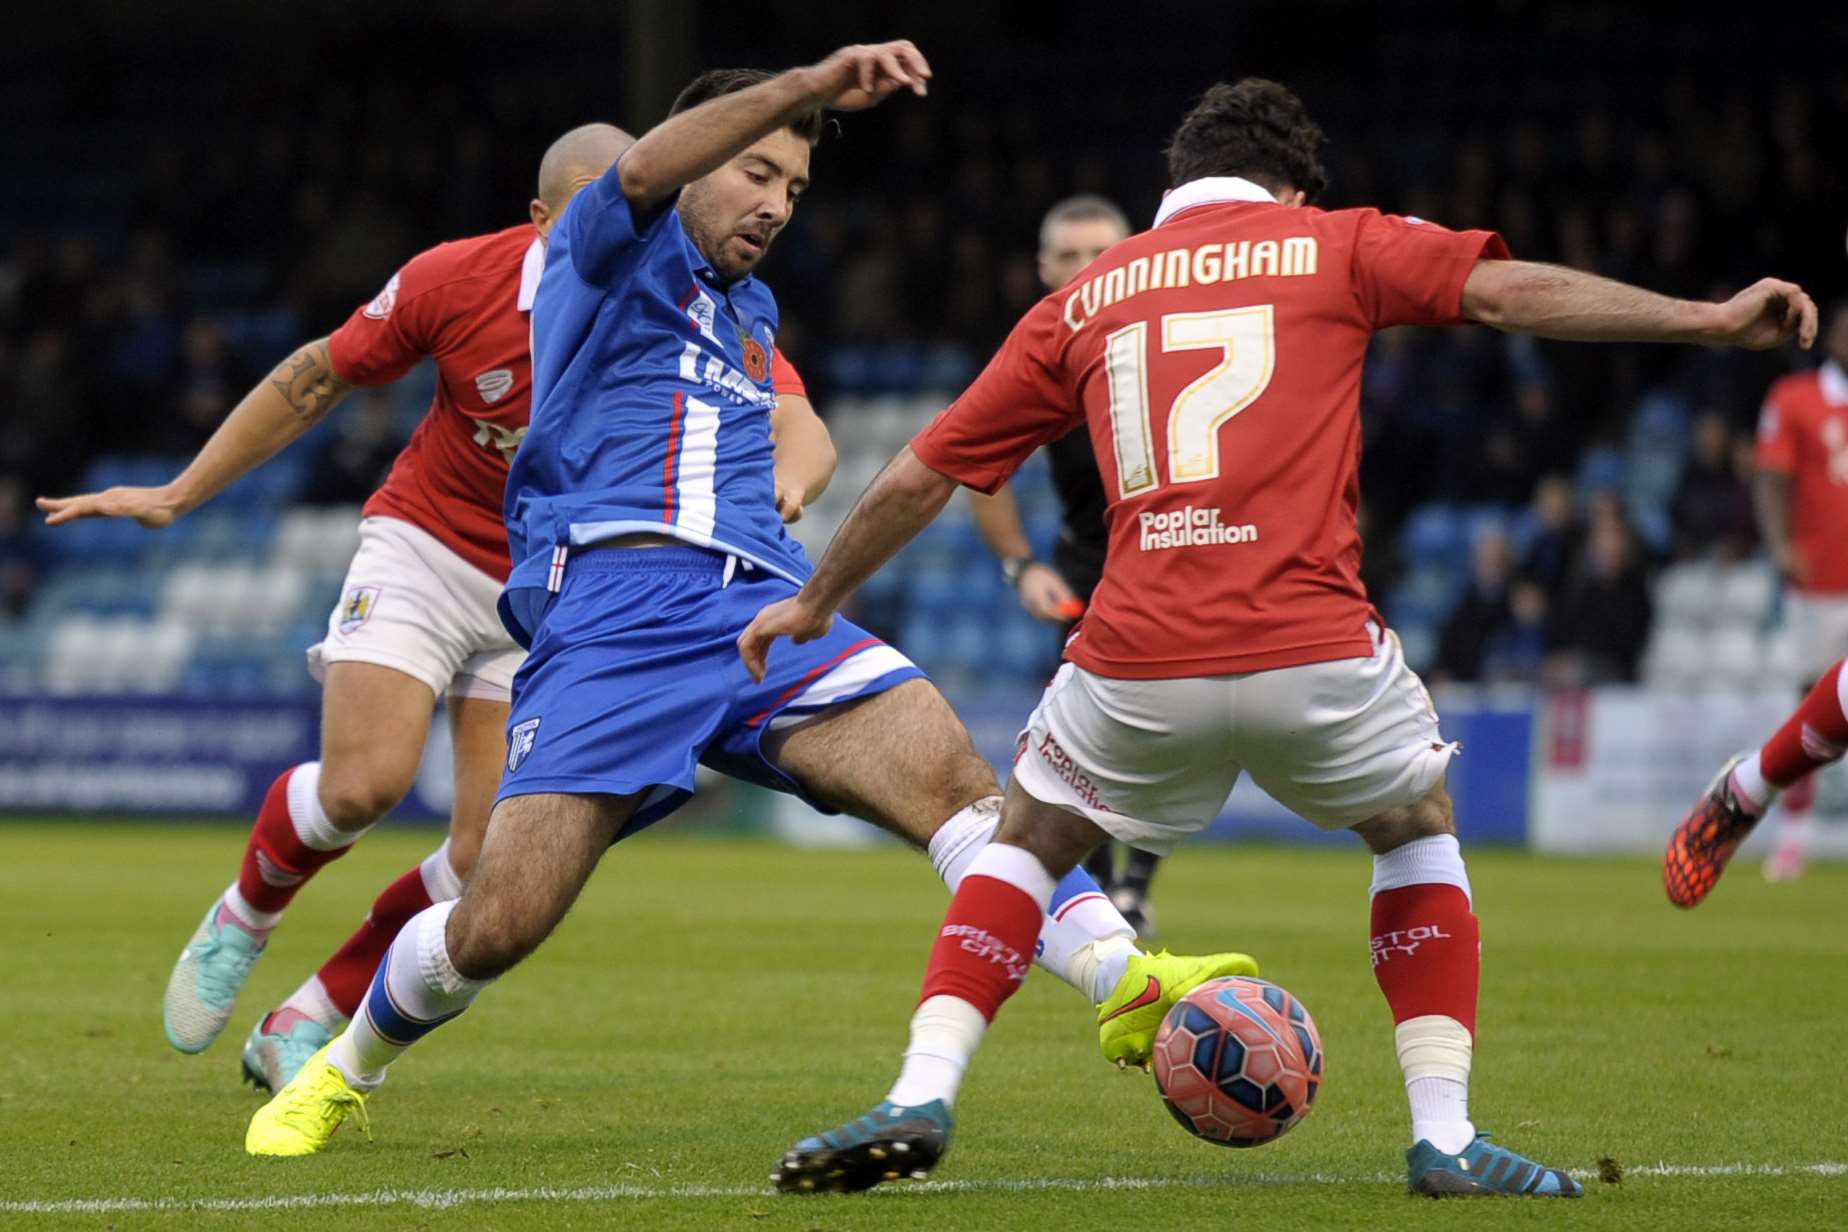 Gillingham face Bristol City at Priestfield on Sunday, December 28. City won on their last visit to Medway - a 2-1 success in the FA Cup in November